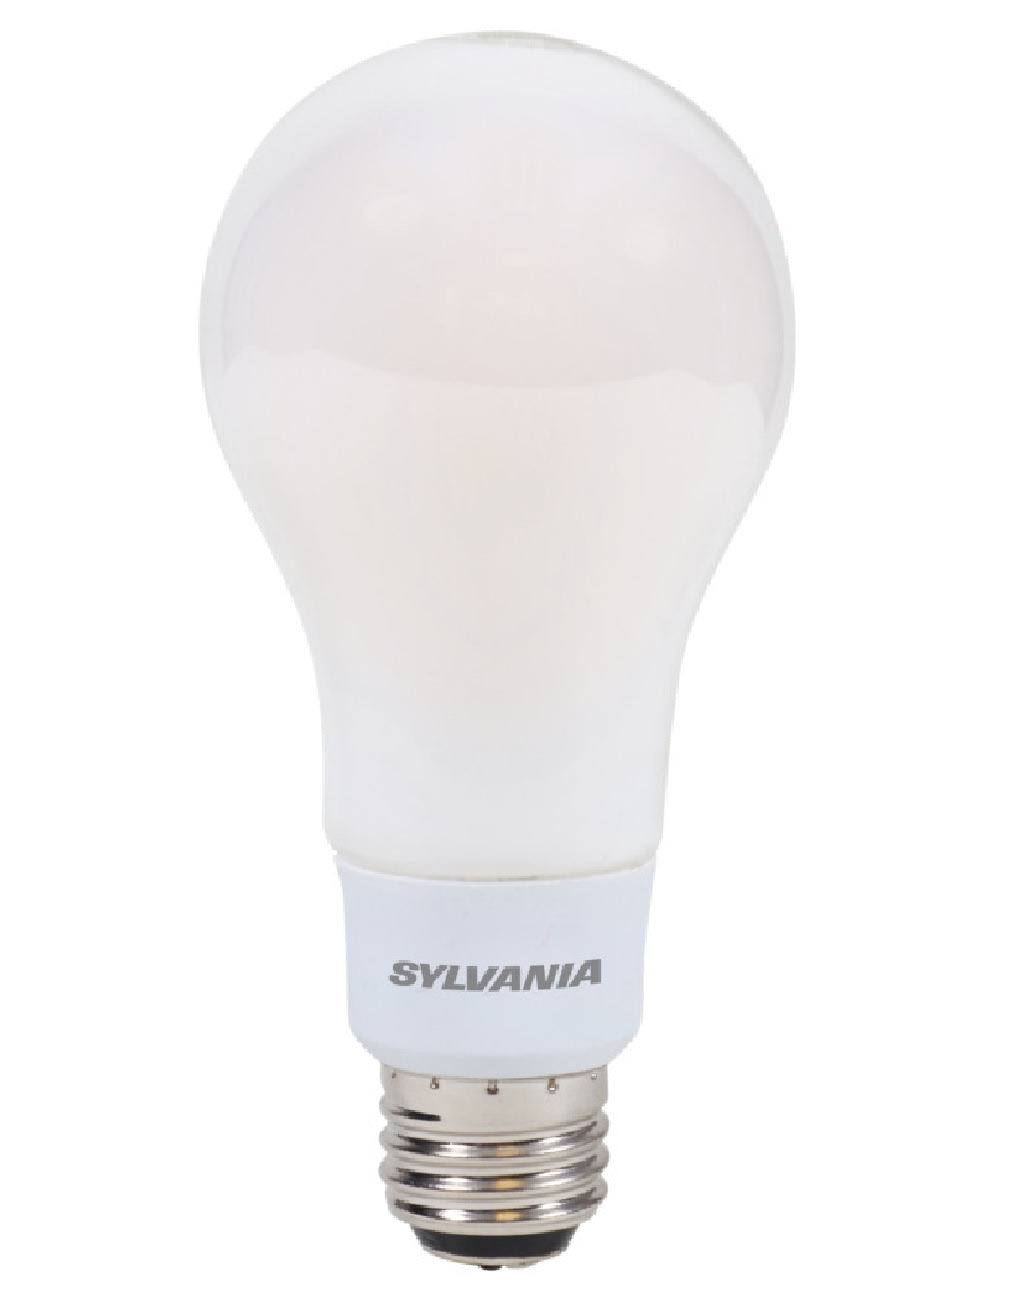 Sylvania 40778 LED Bulb Natural A21 E26 (Medium) Daylight 40/60/100 W Frosted